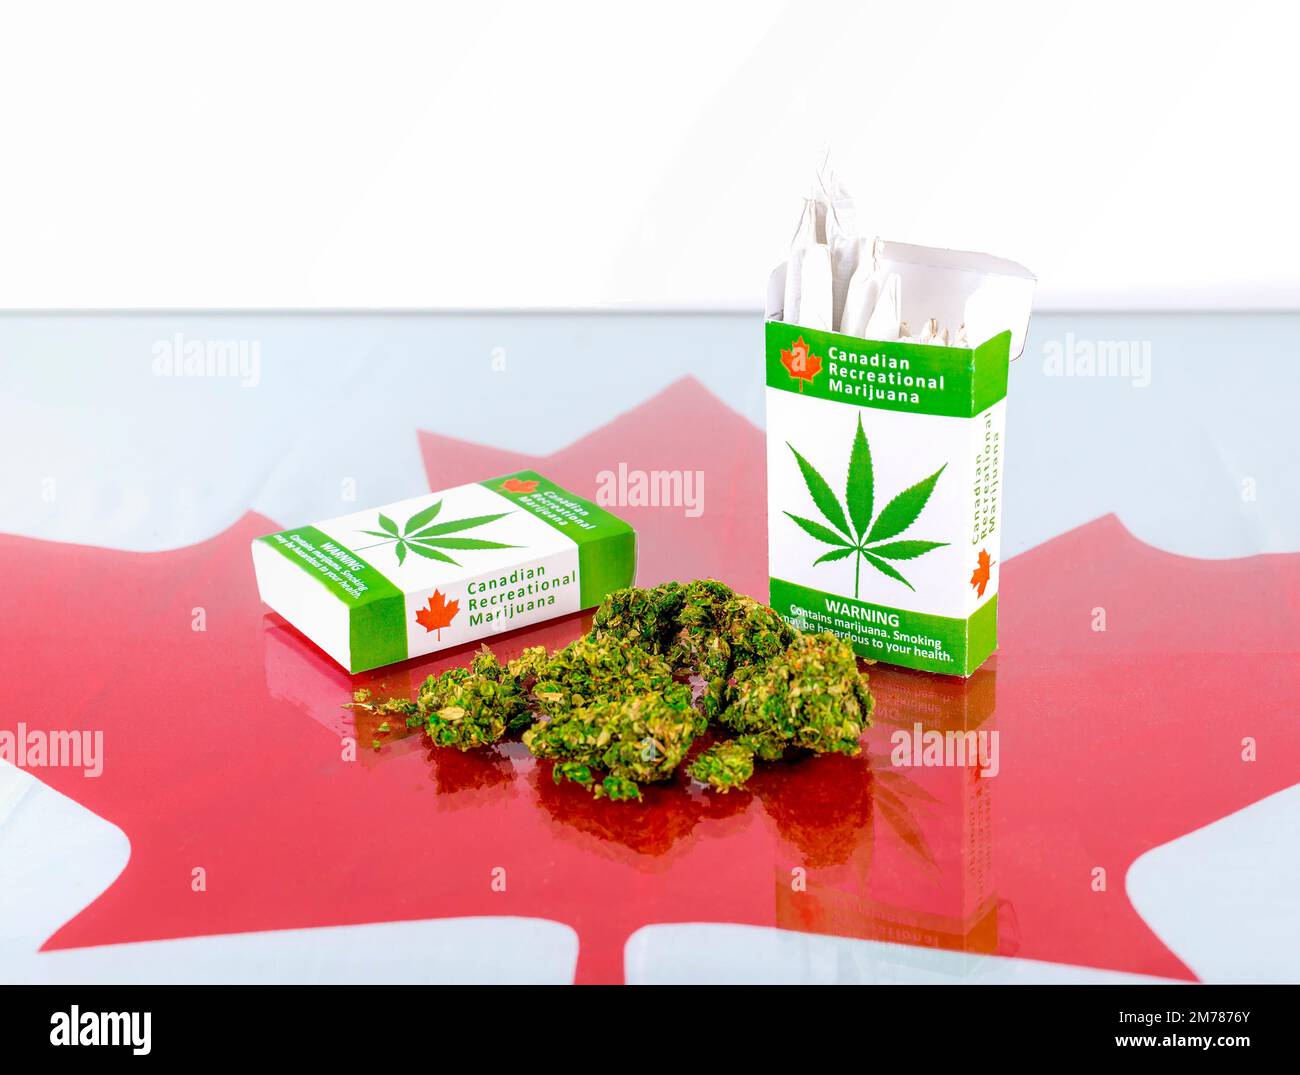 Cannabis in Canada. Two packages of marijuana cigarettes with buds lying on a glass table. A maple leaf is under the glass. Joints stick up from pack. Stock Photo